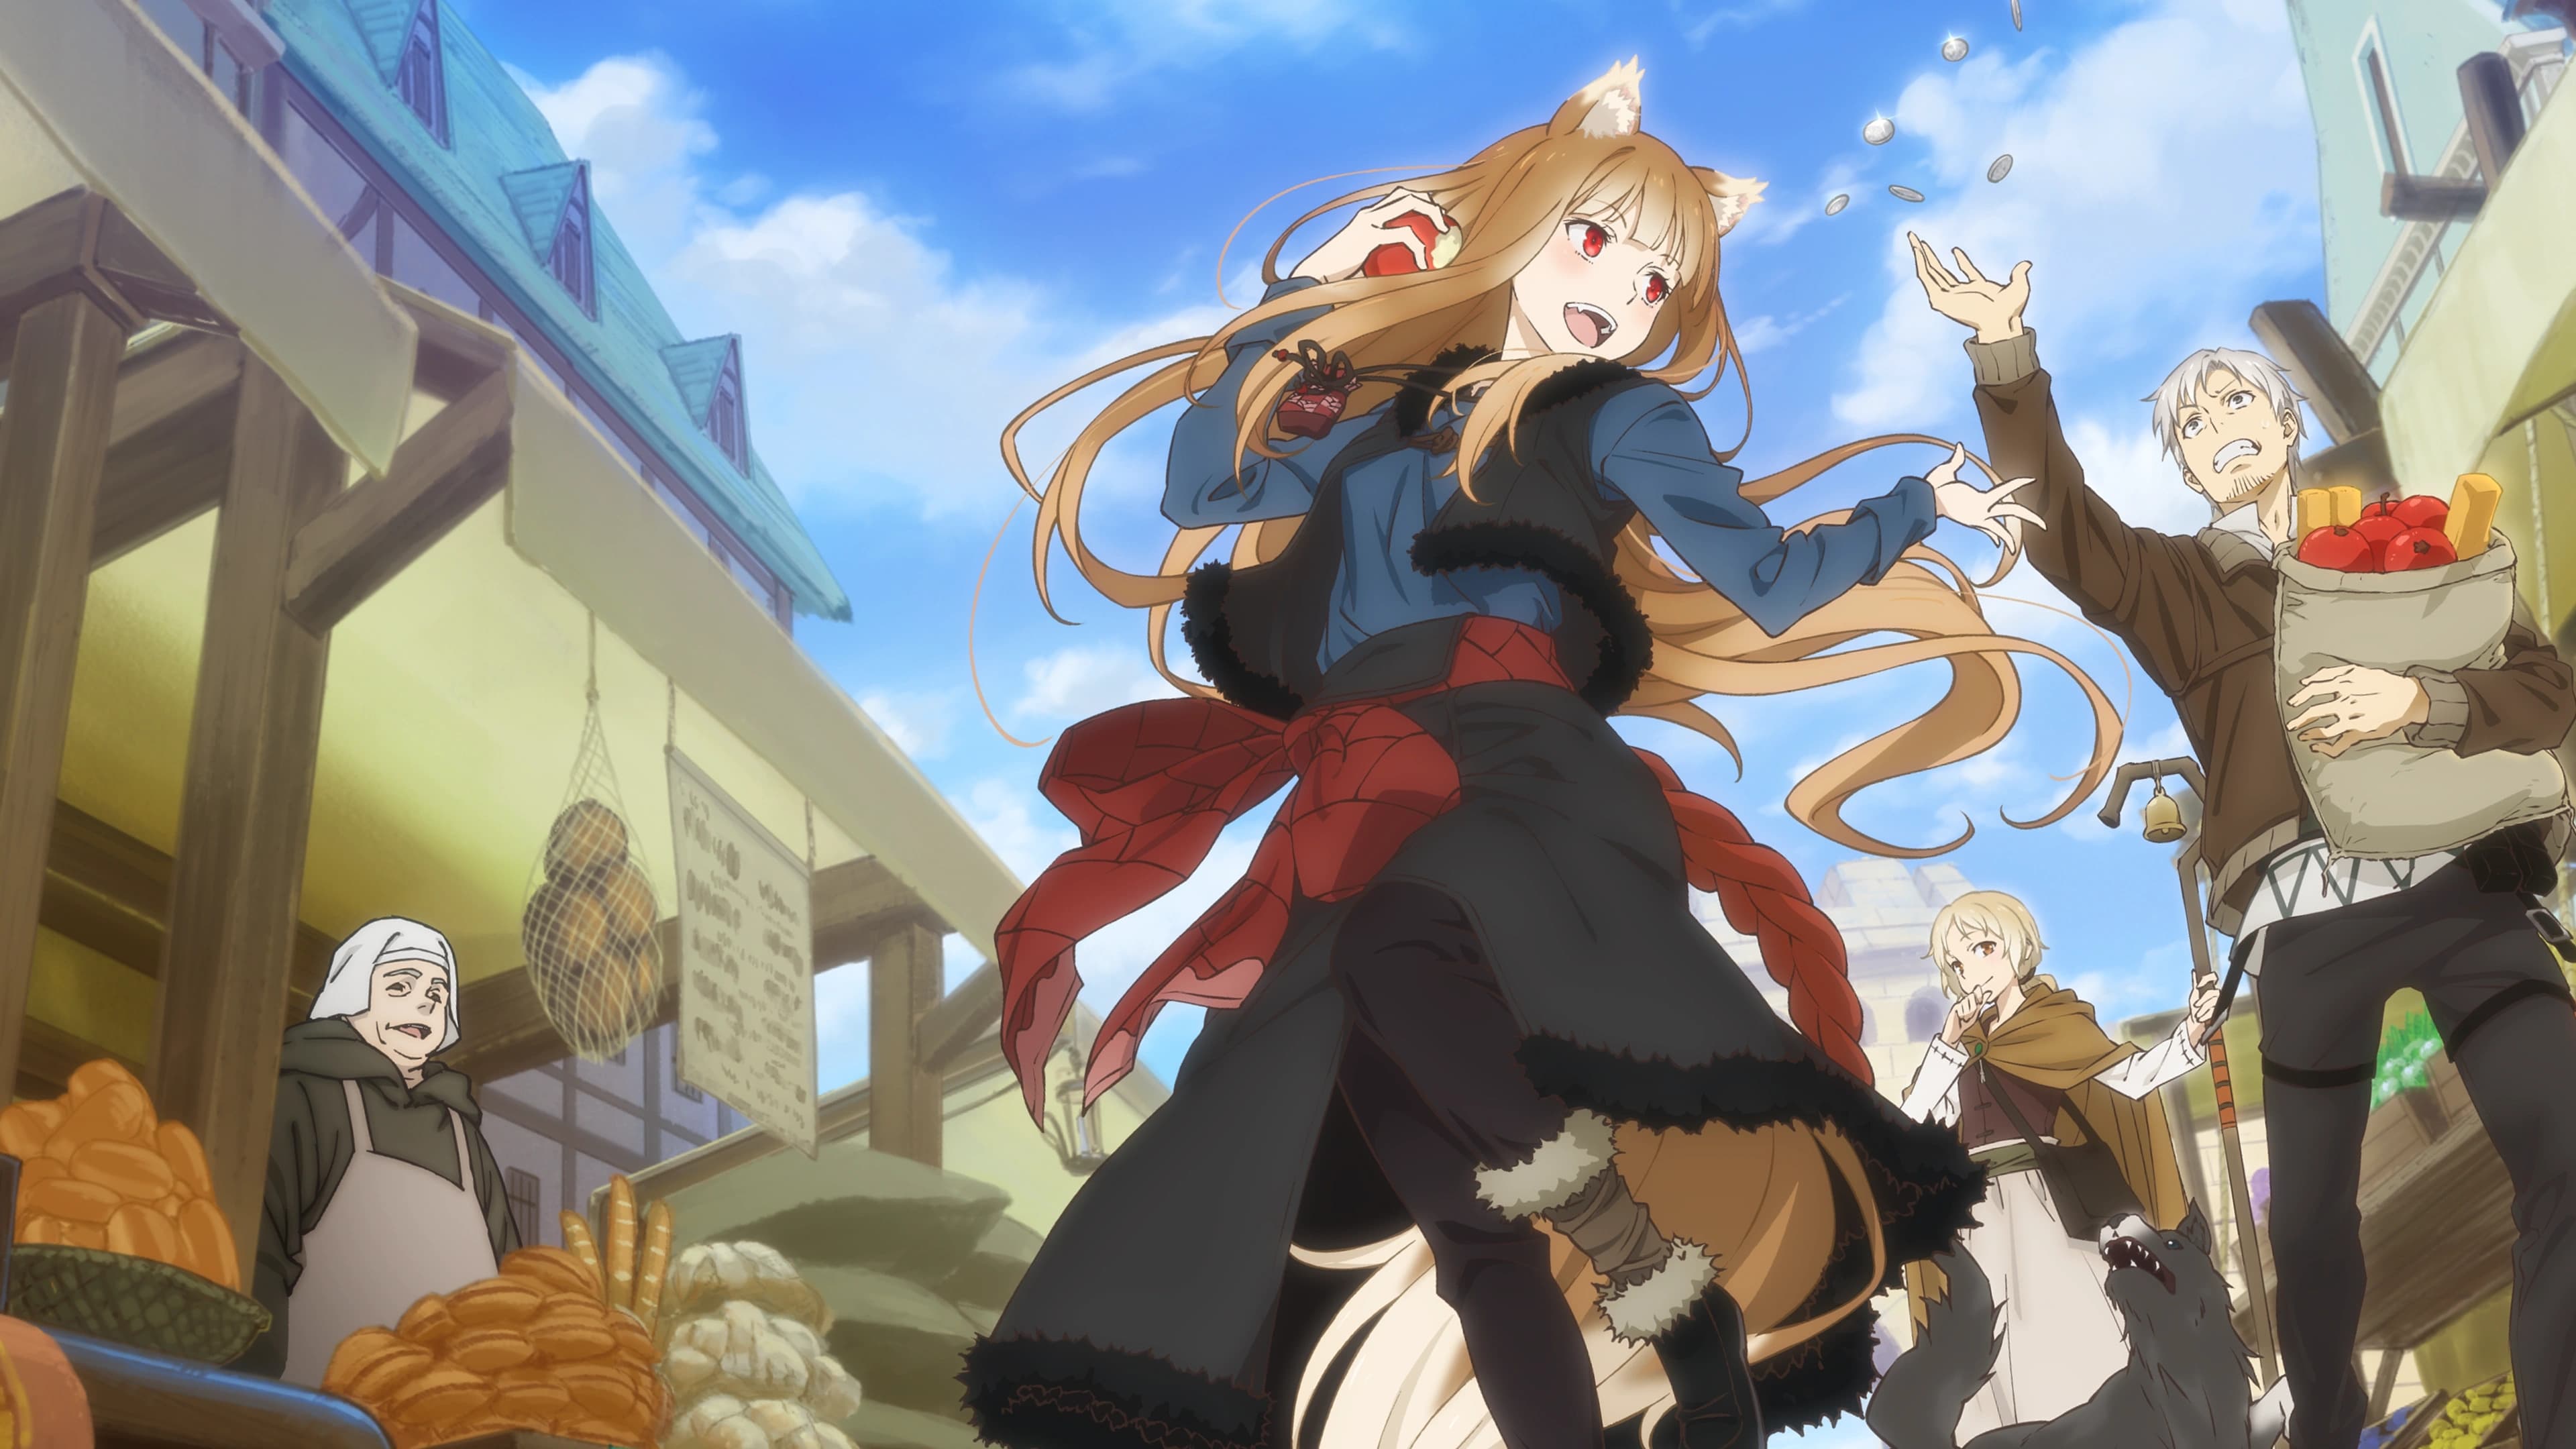 Spice and Wolf: MERCHANT MEETS THE WISE WOLF - Season 1 Episode 14